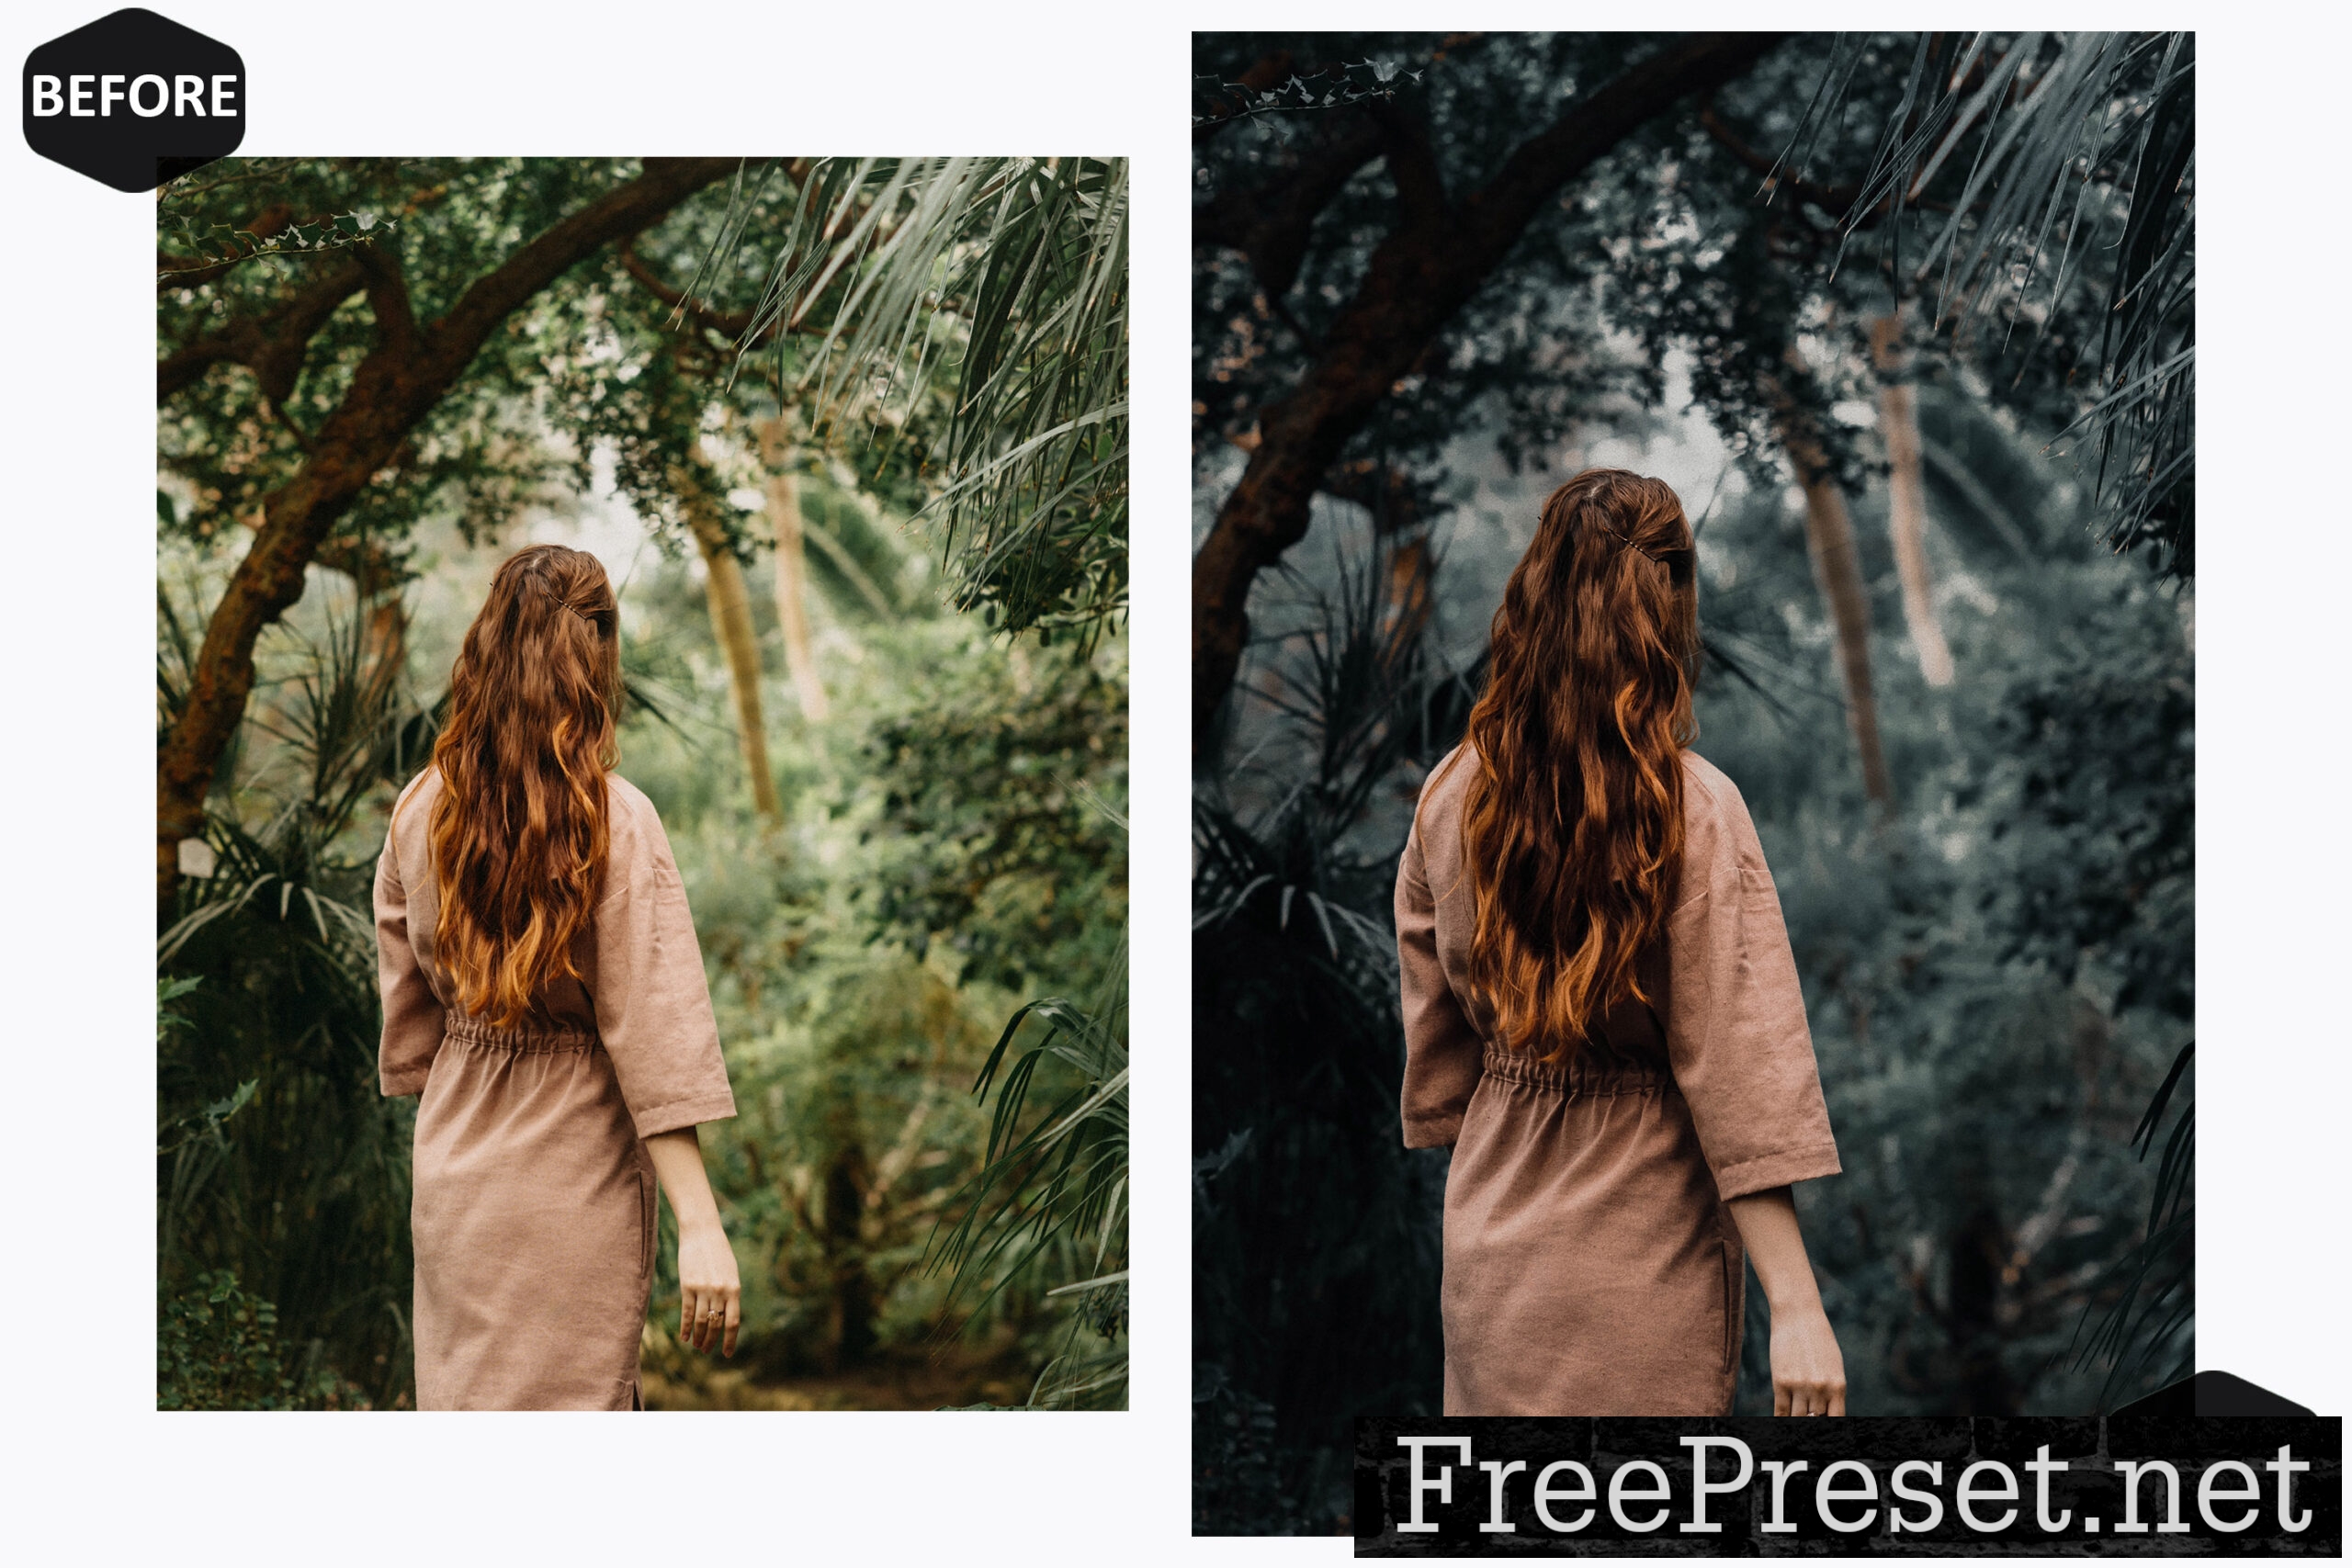 16 Rich Green Photoshop Actions and ACR